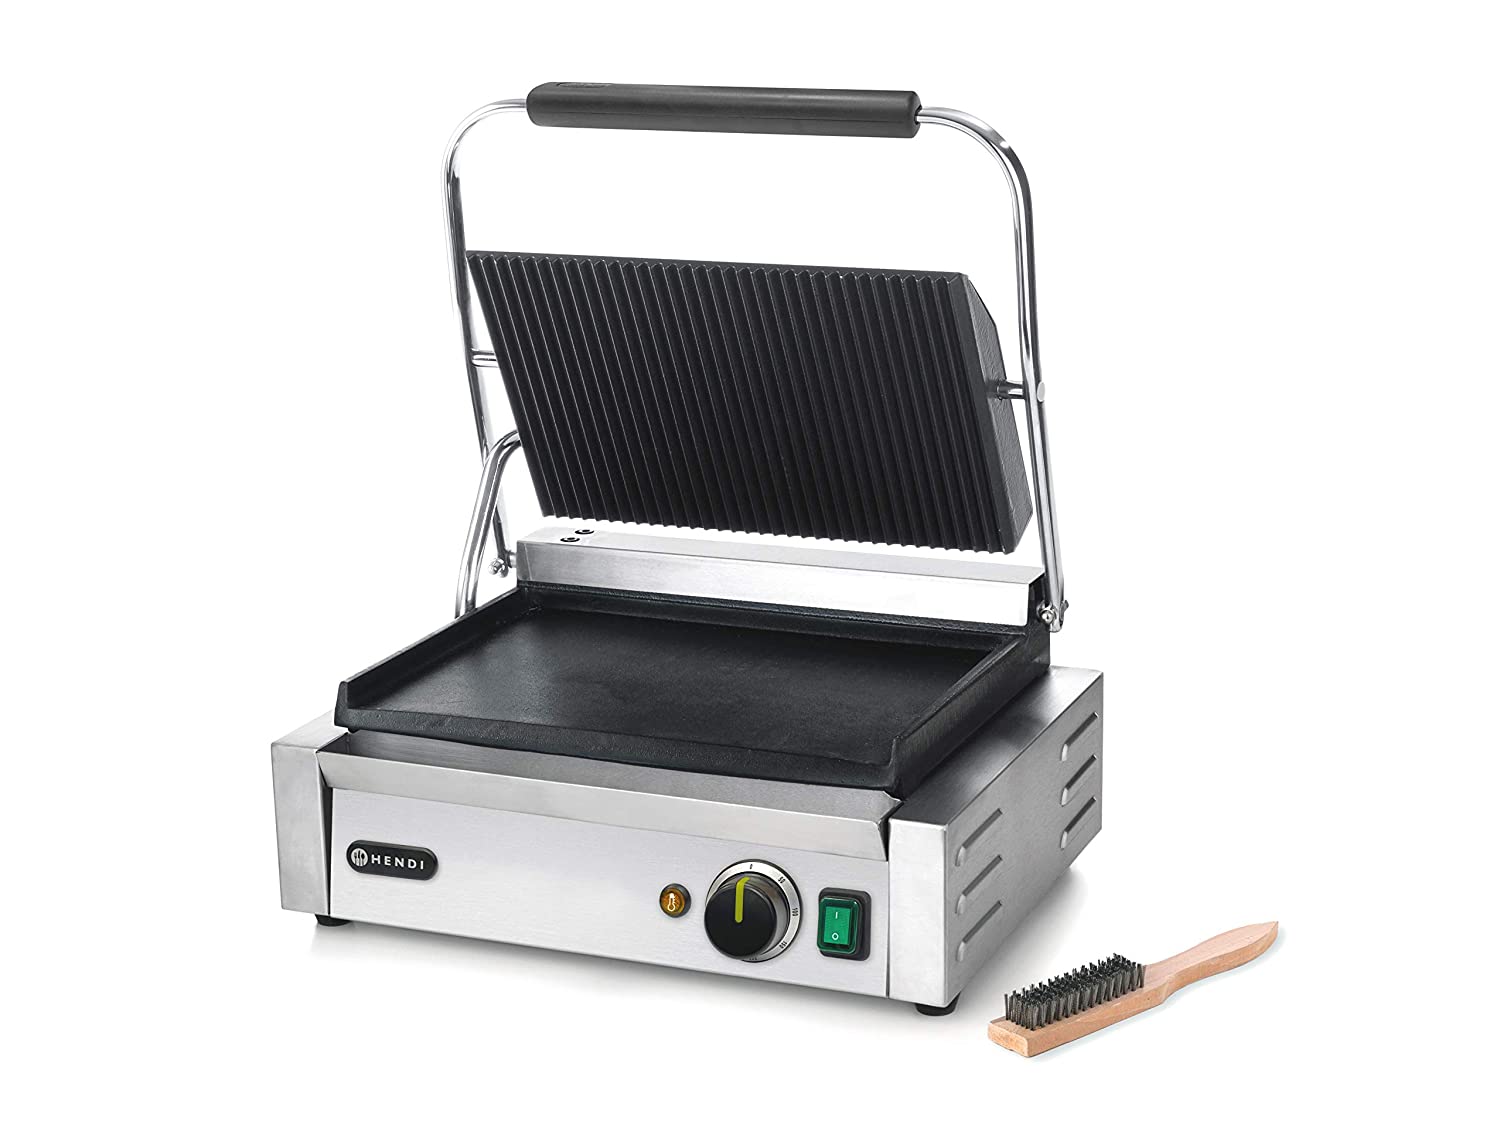 Hendi Contact Grill Panini, Top And Bottom Smooth